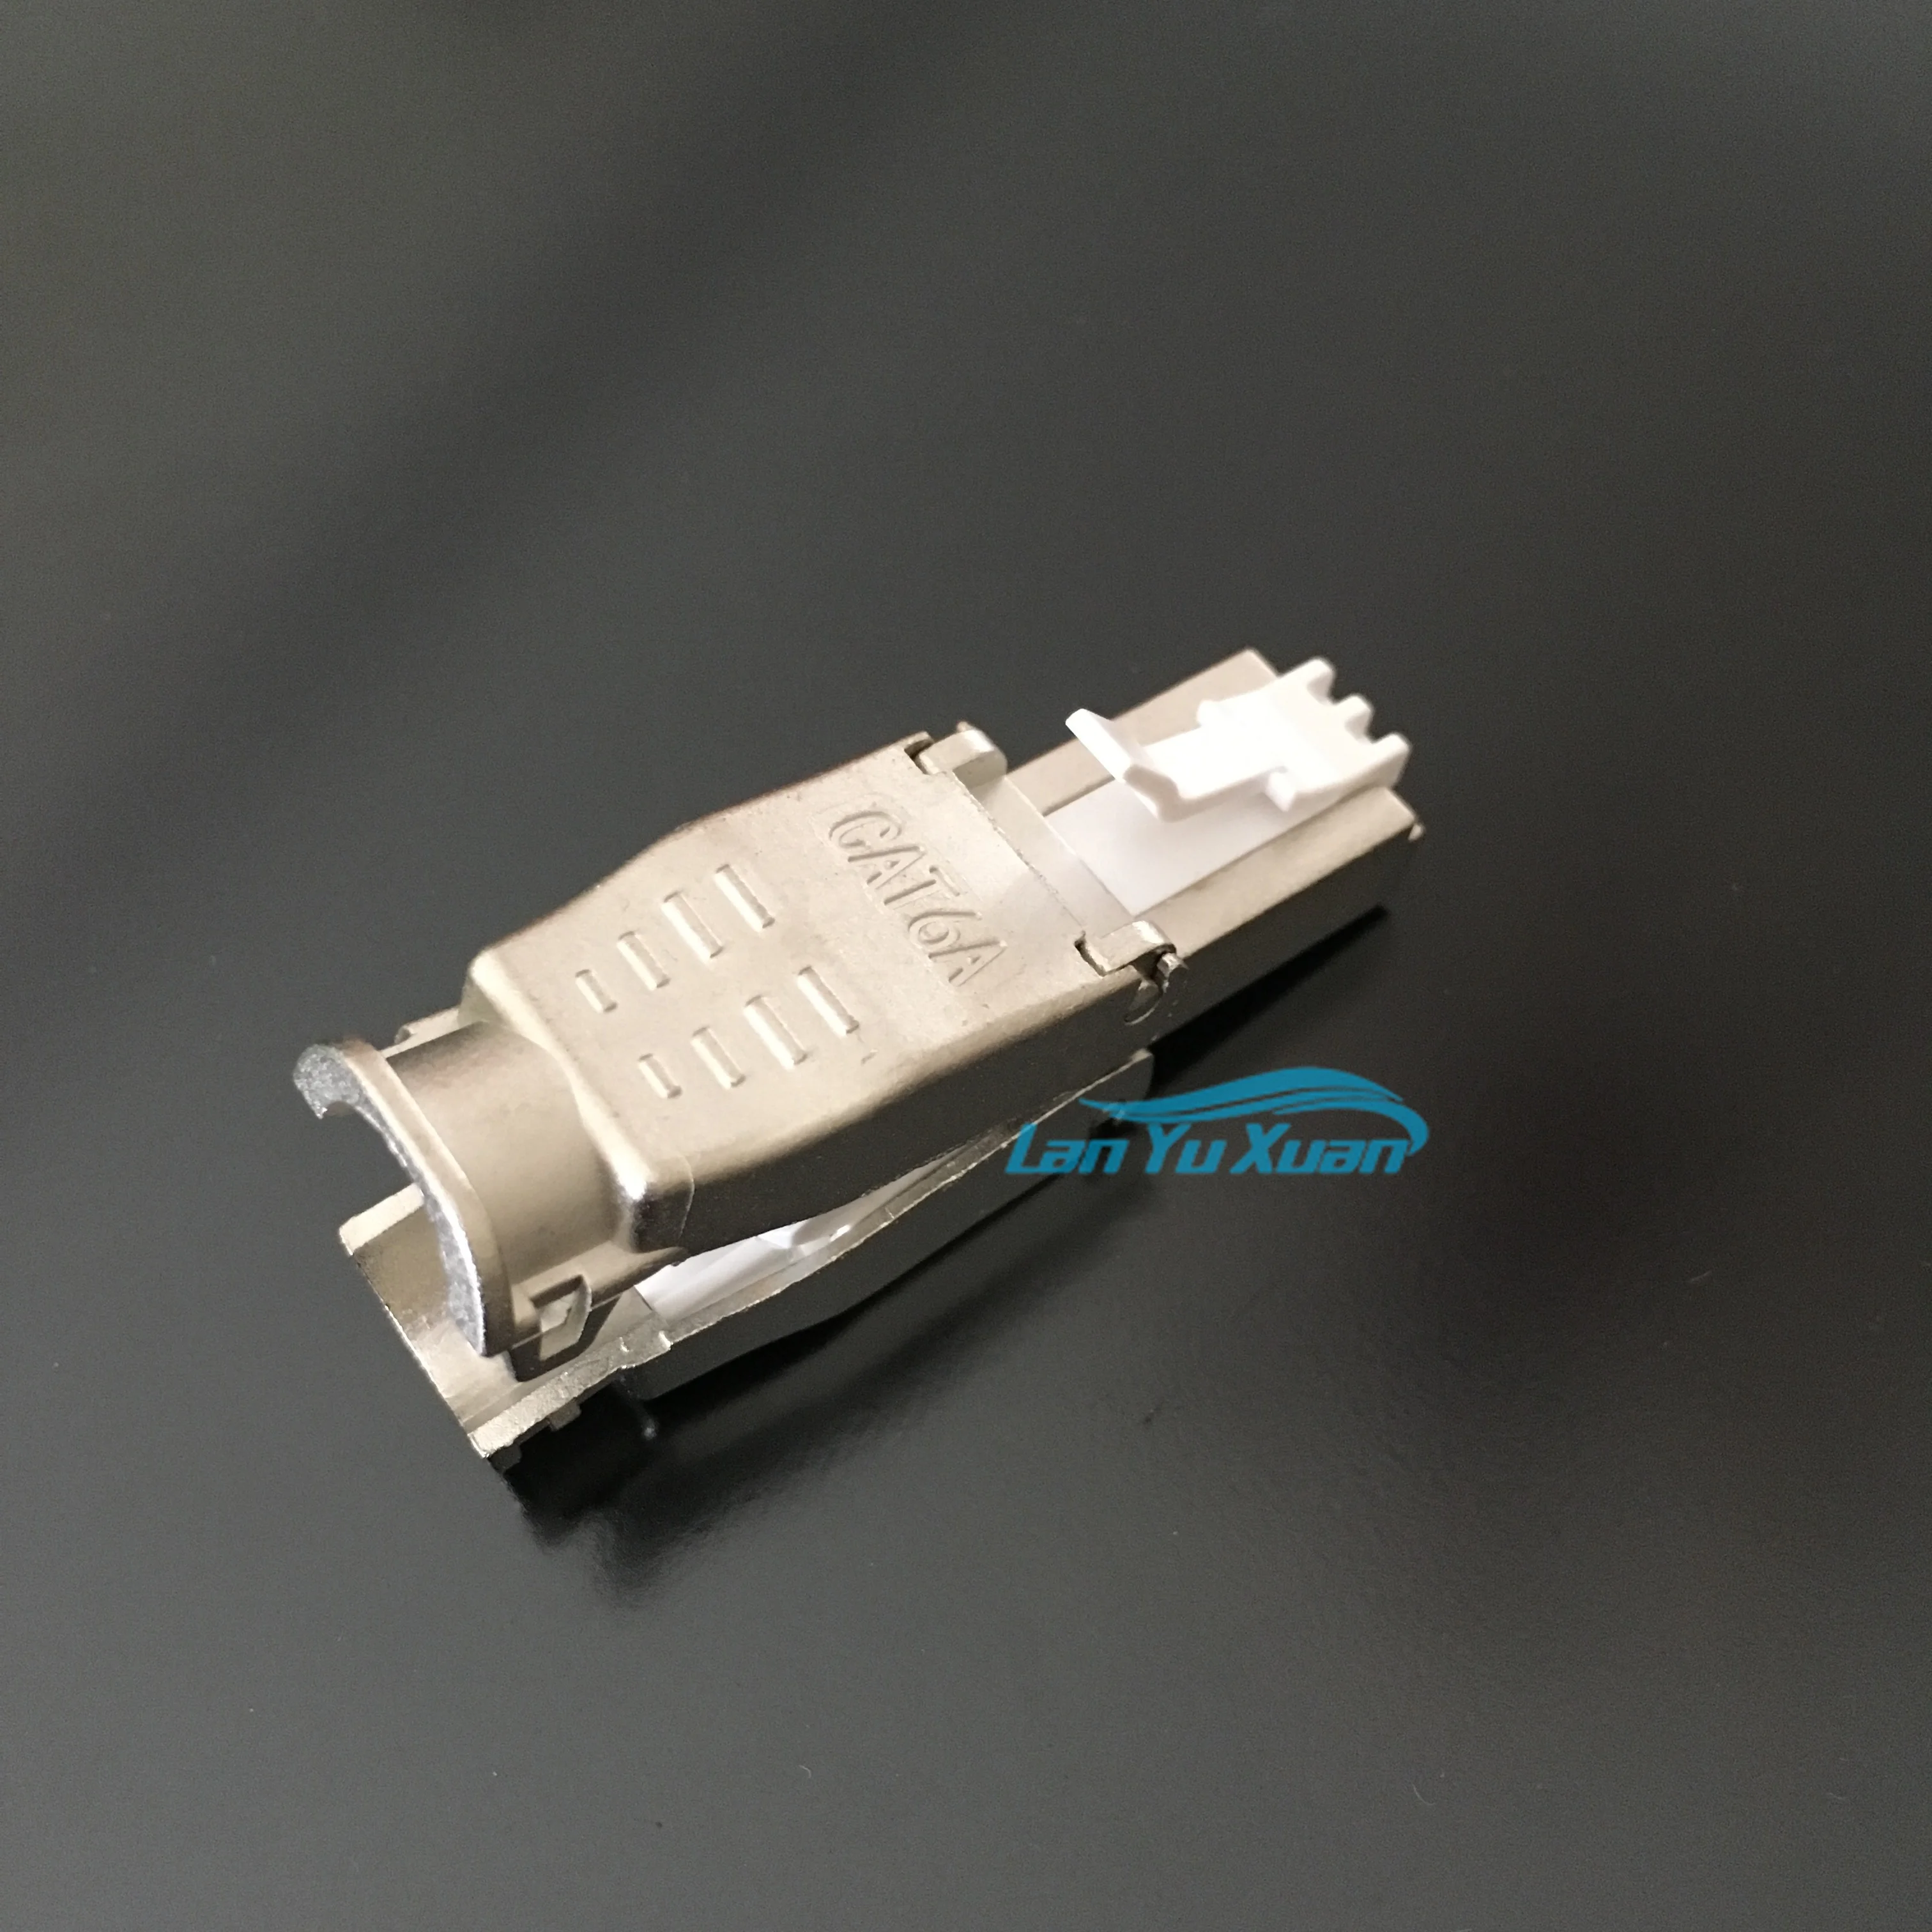 

RJ45 8P8C Tool Free Connector Cat6A Modular Plug for 23AWG